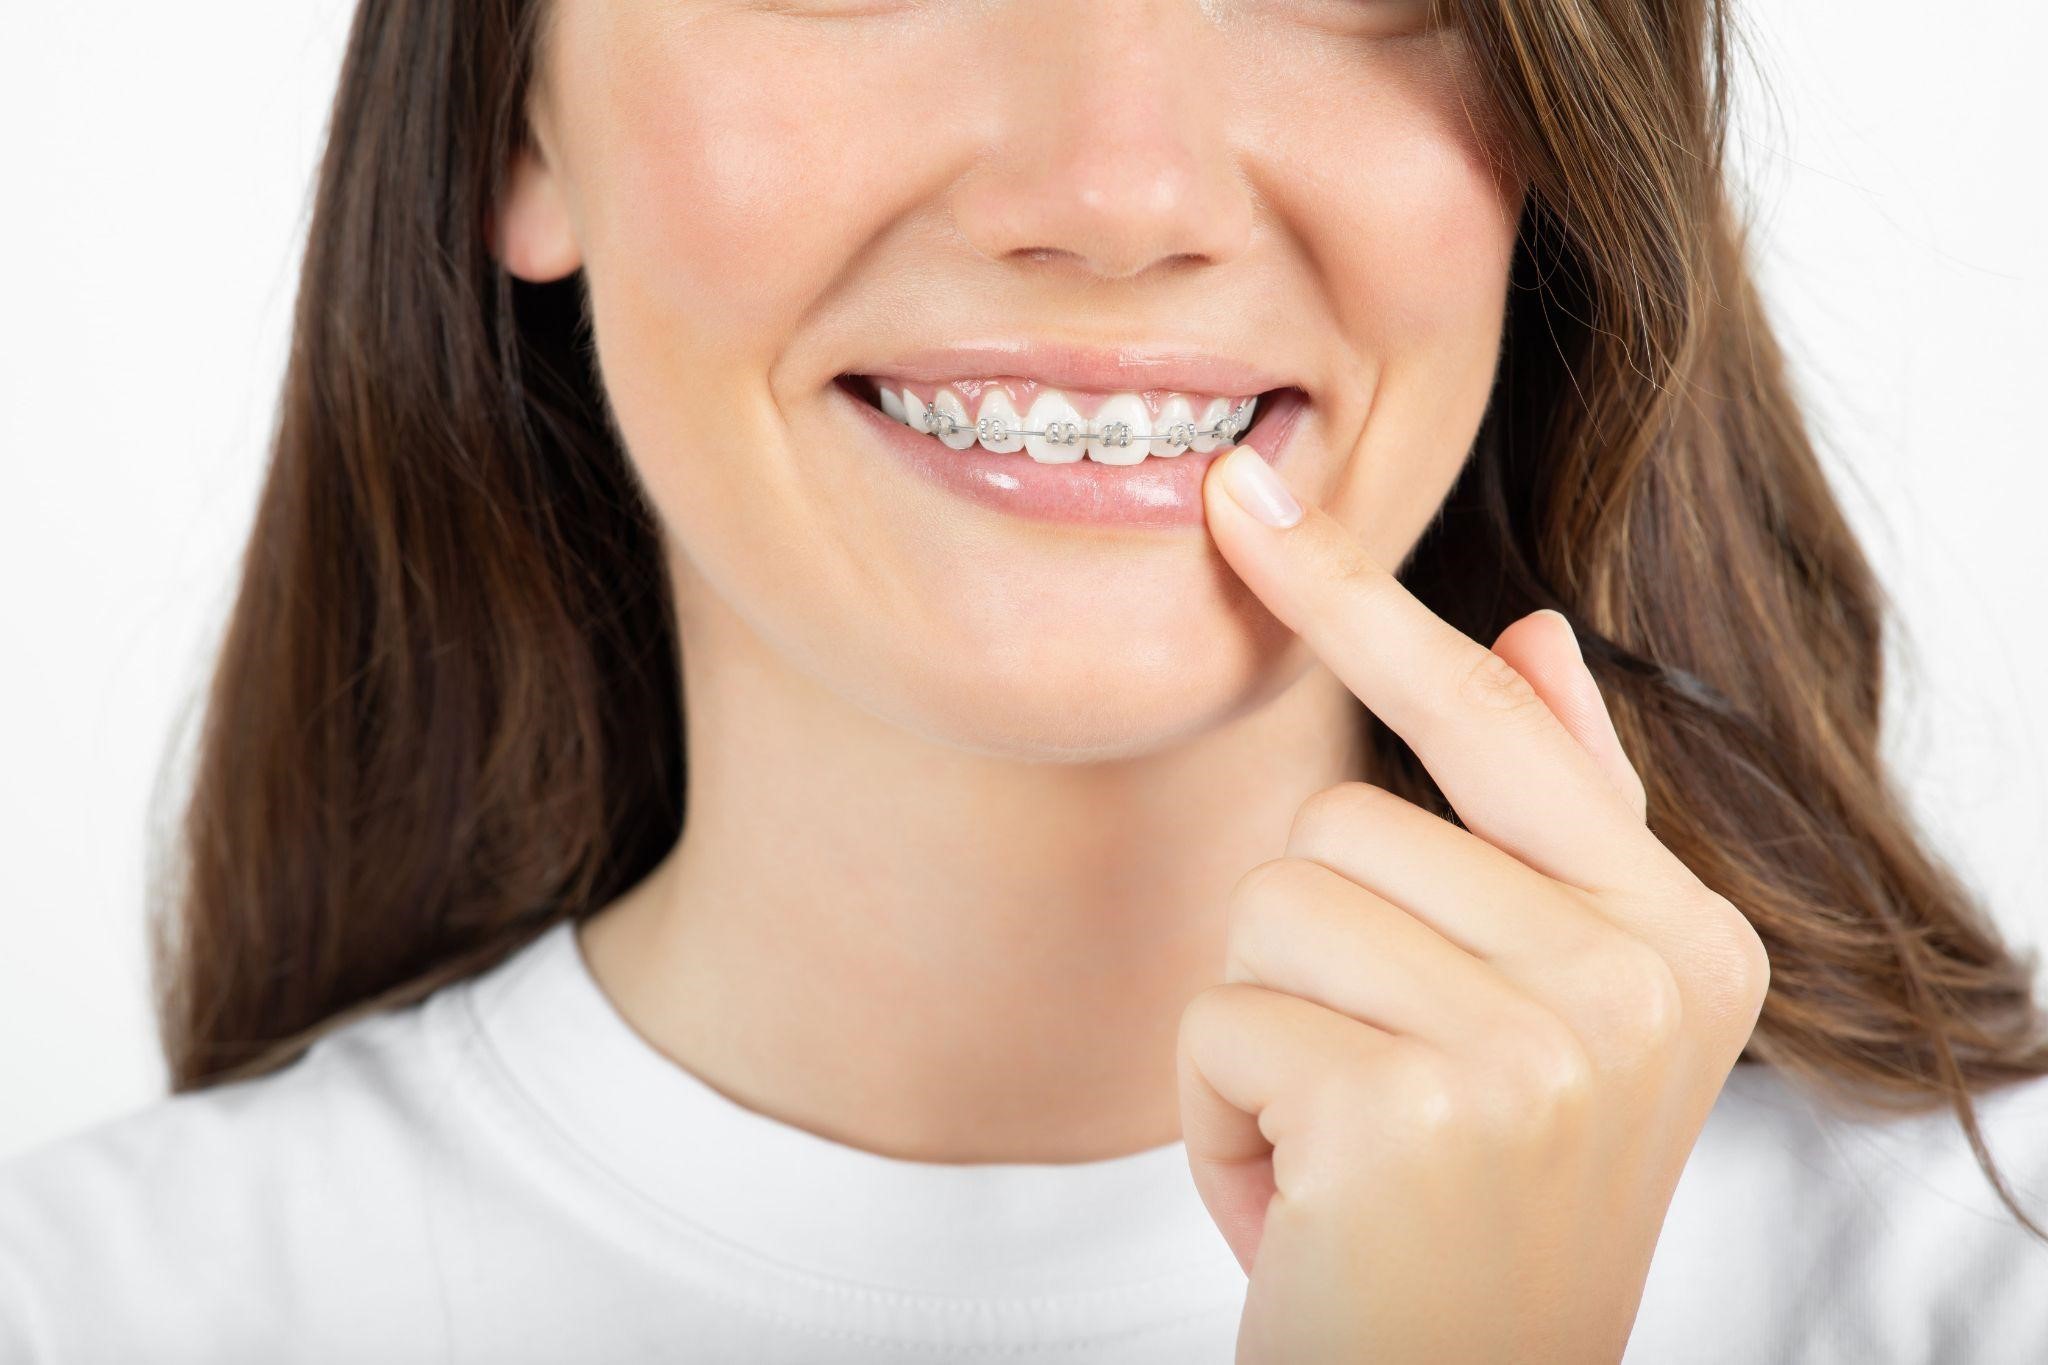 Need Braces in Vegas? Find an Expert At